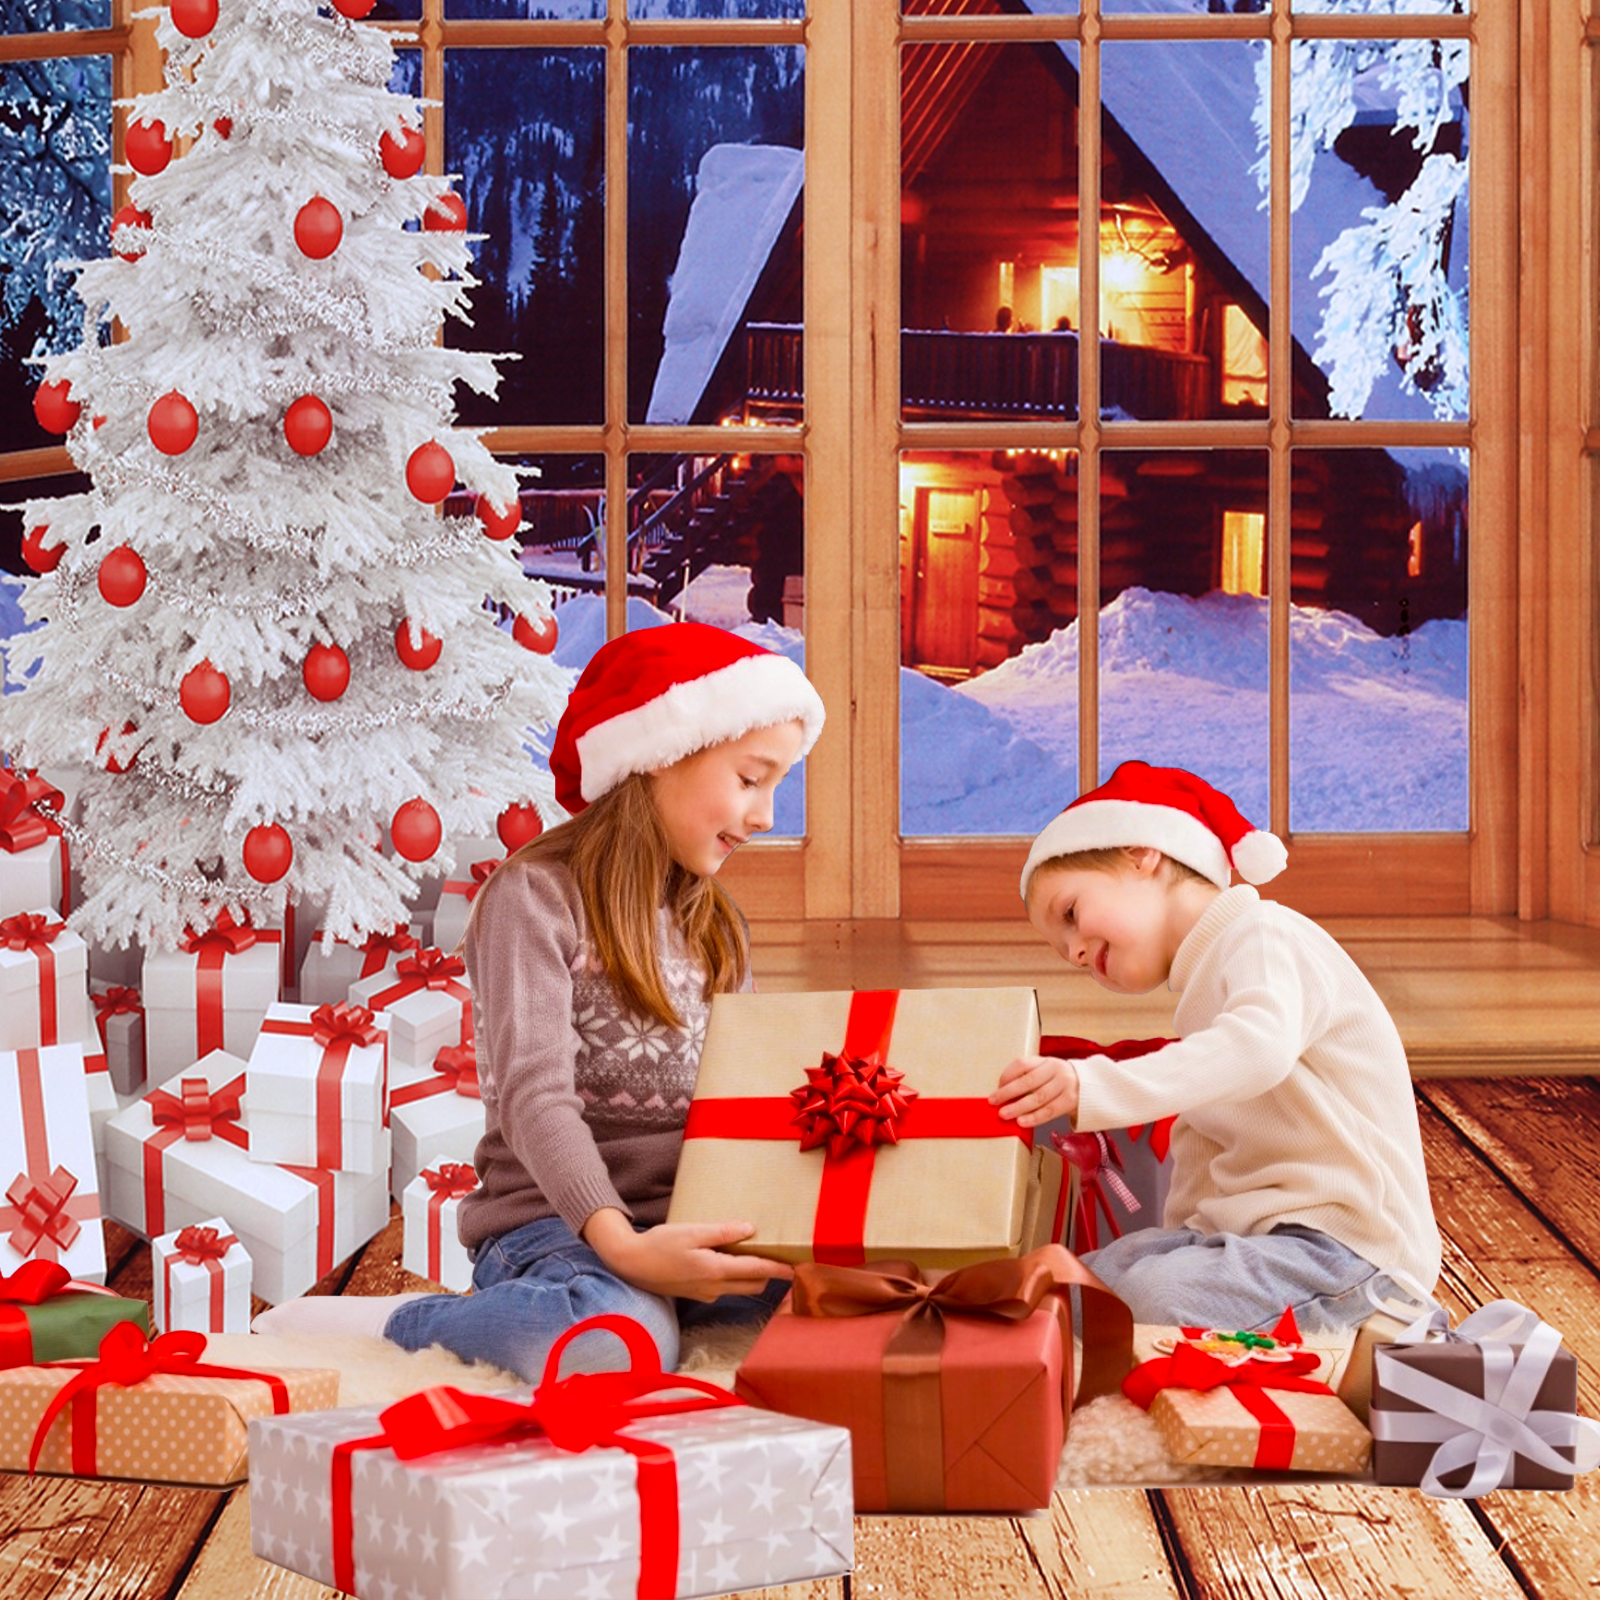 Mohoo-5x7ft-15x21m-Christmas-Backdrop-Photo-Window-Backdrop-with-Wooden-Floor-Christmas-Tree-Snow-Co-1958159-3